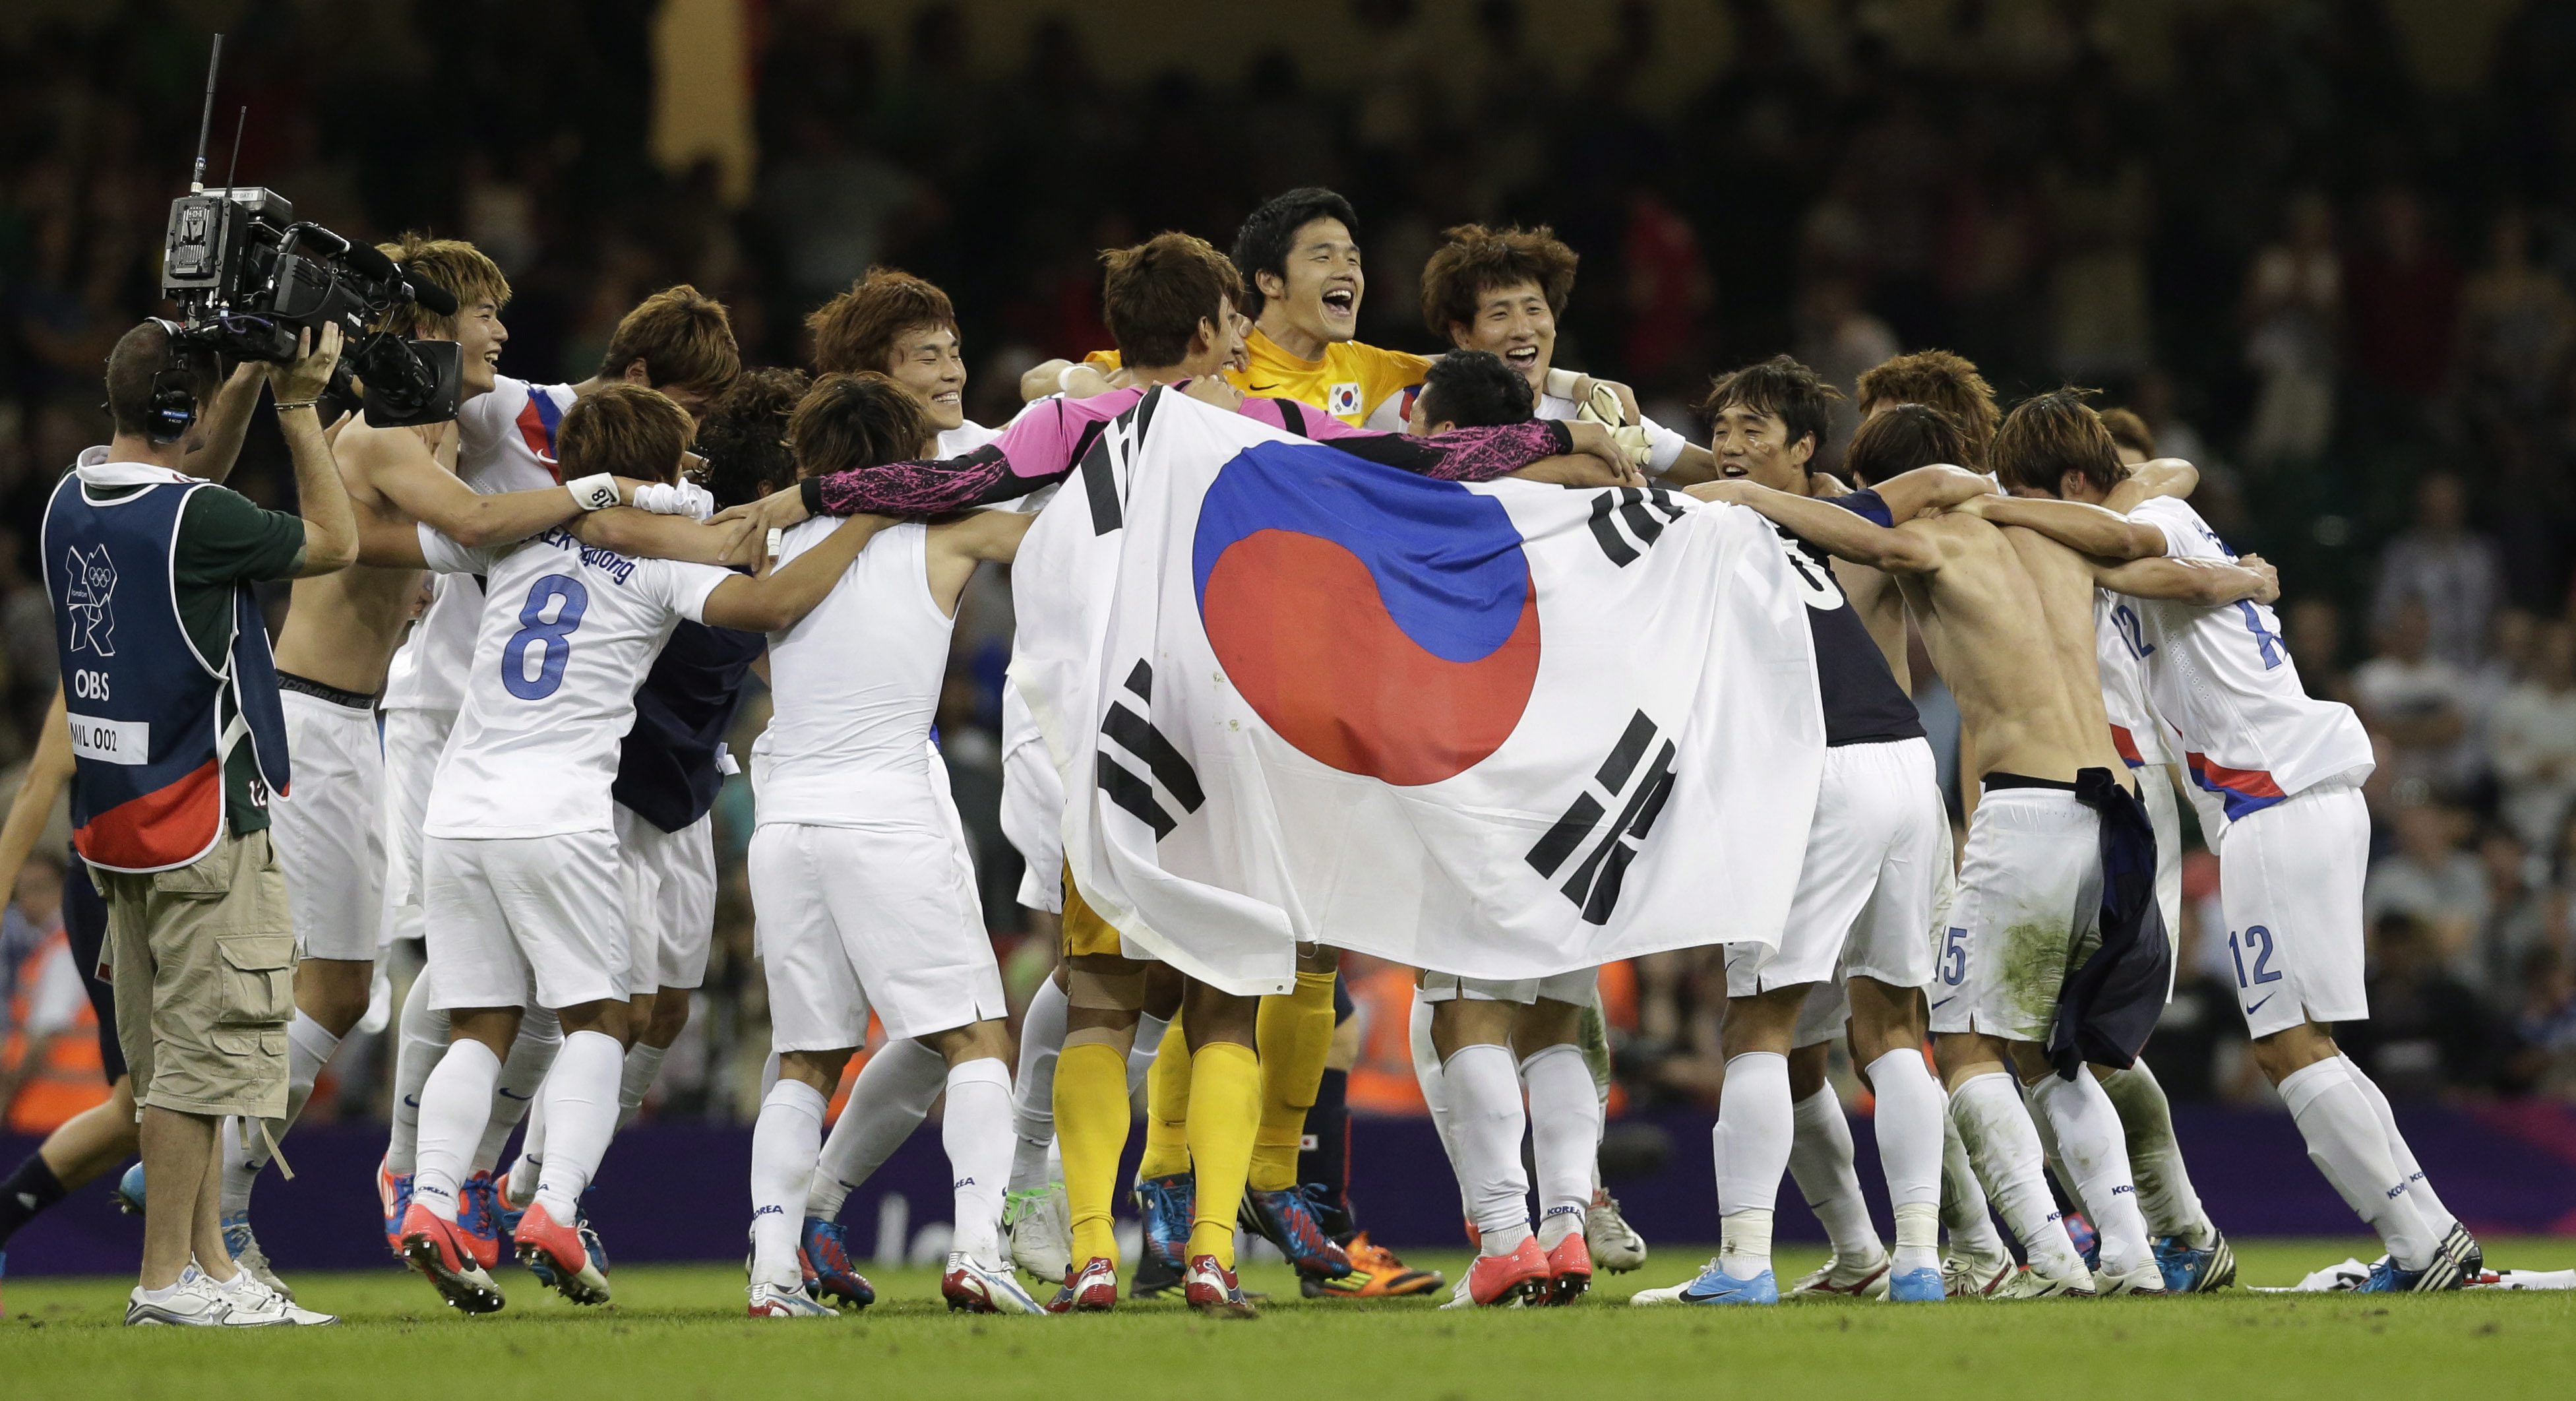 South Korea's players celebrate after winning their men's soccer bronze medal match against Japan, in Cardiff, Wales, at the 2012 London Summer Olympics, Friday, Aug. 10, 2012. South Korea won 2-0. (AP Photo/Luca Bruno)